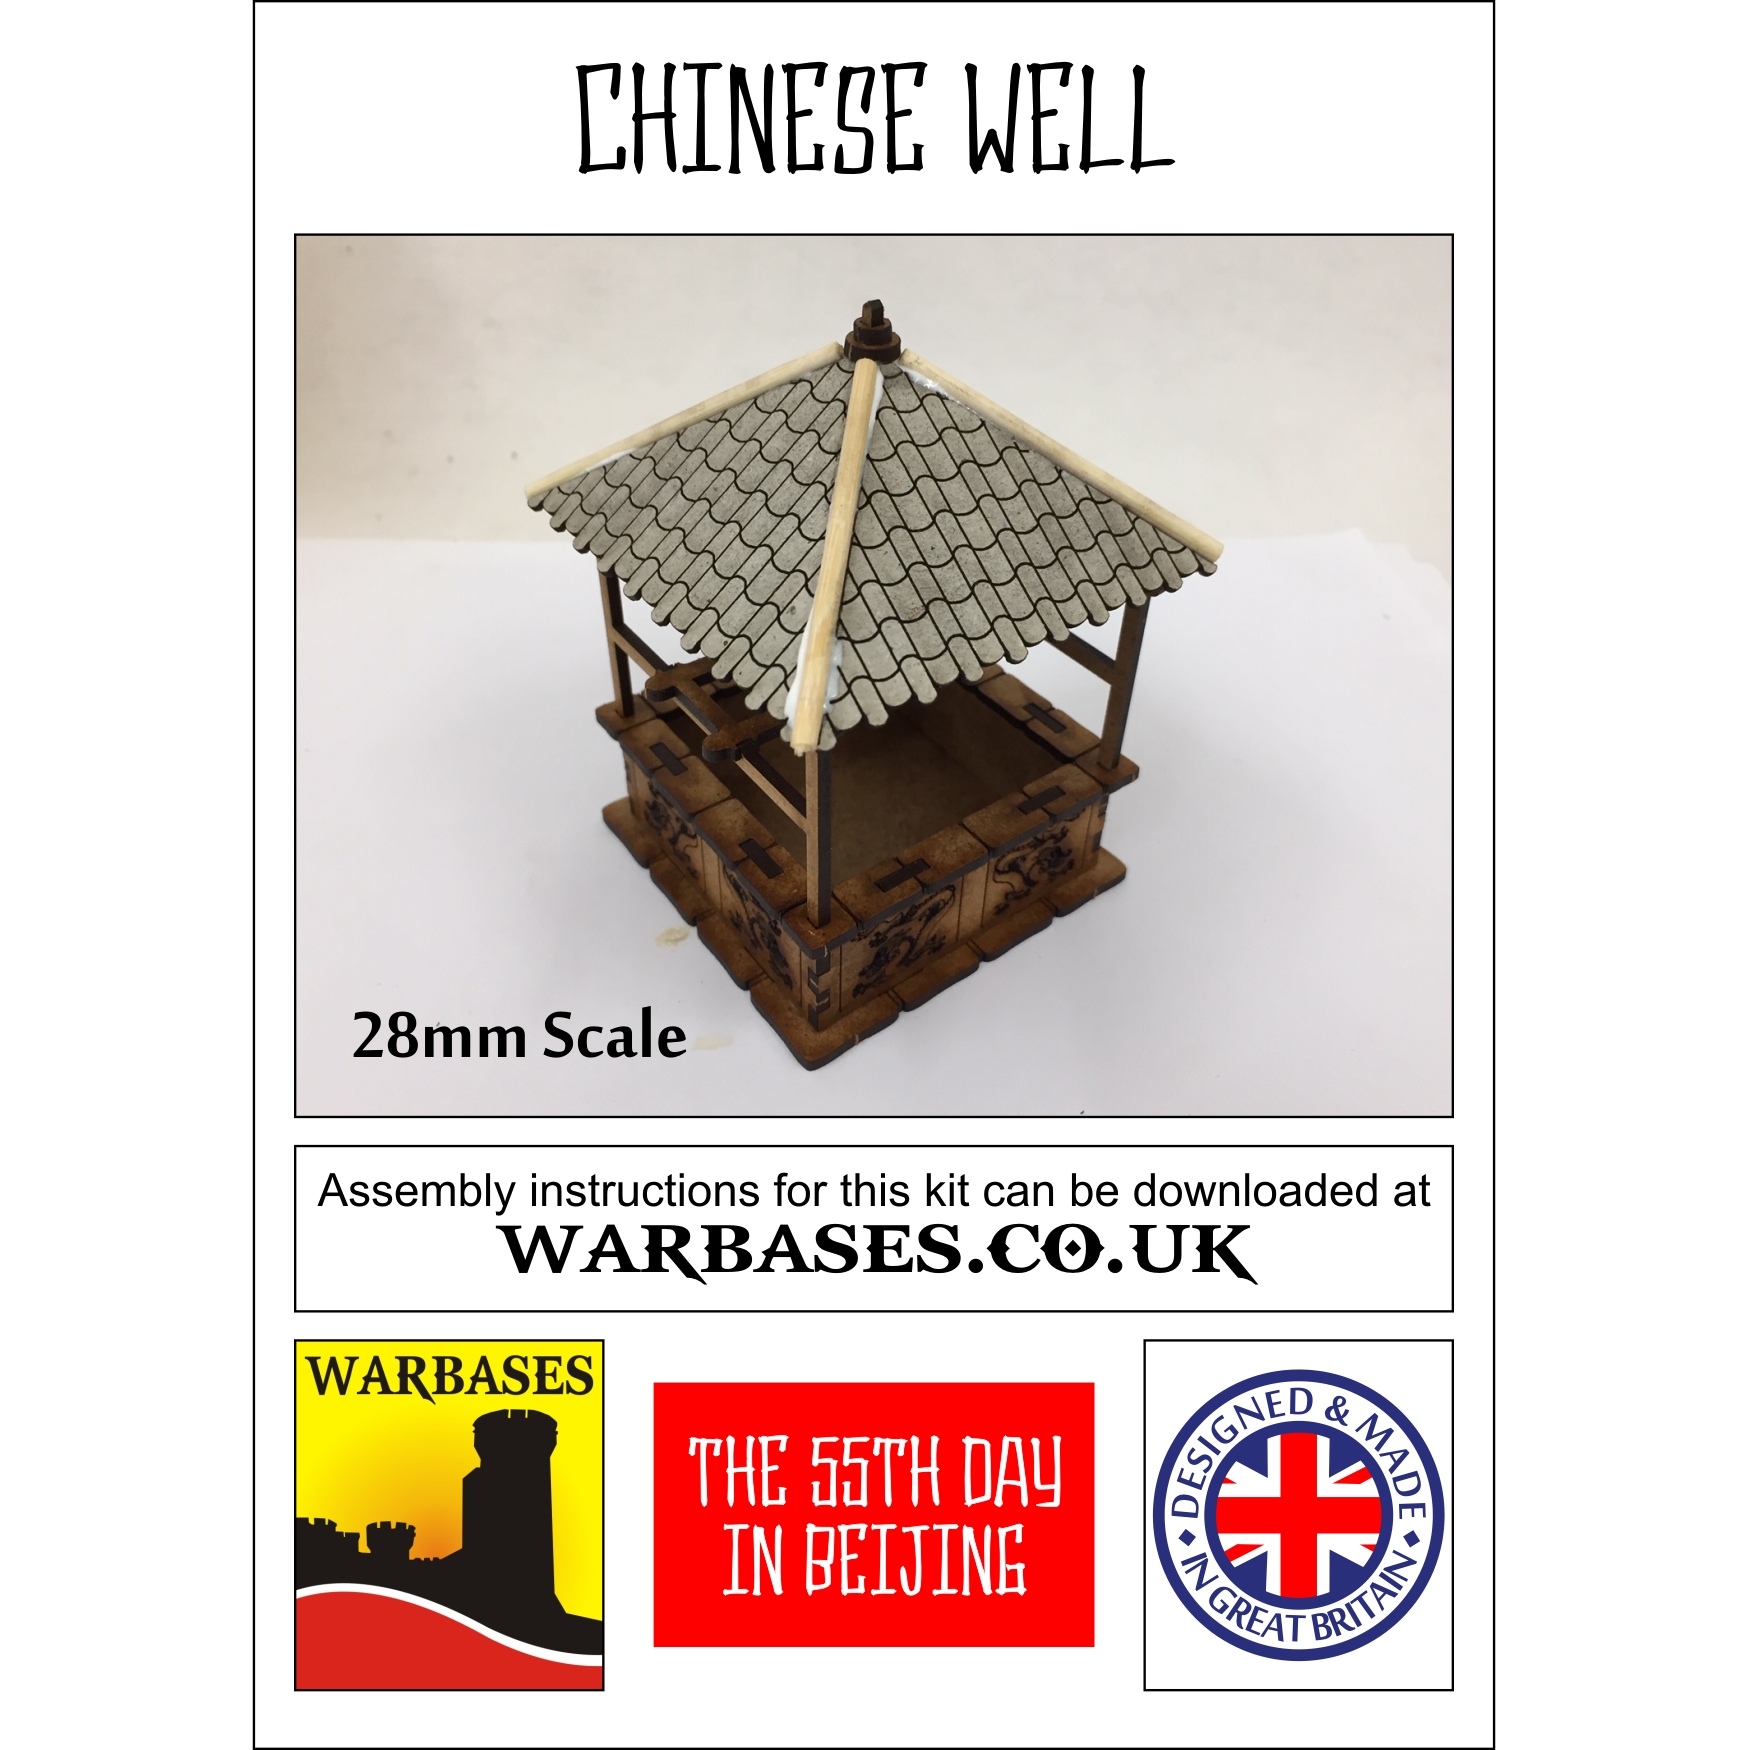 CHA2 - Chinese Well